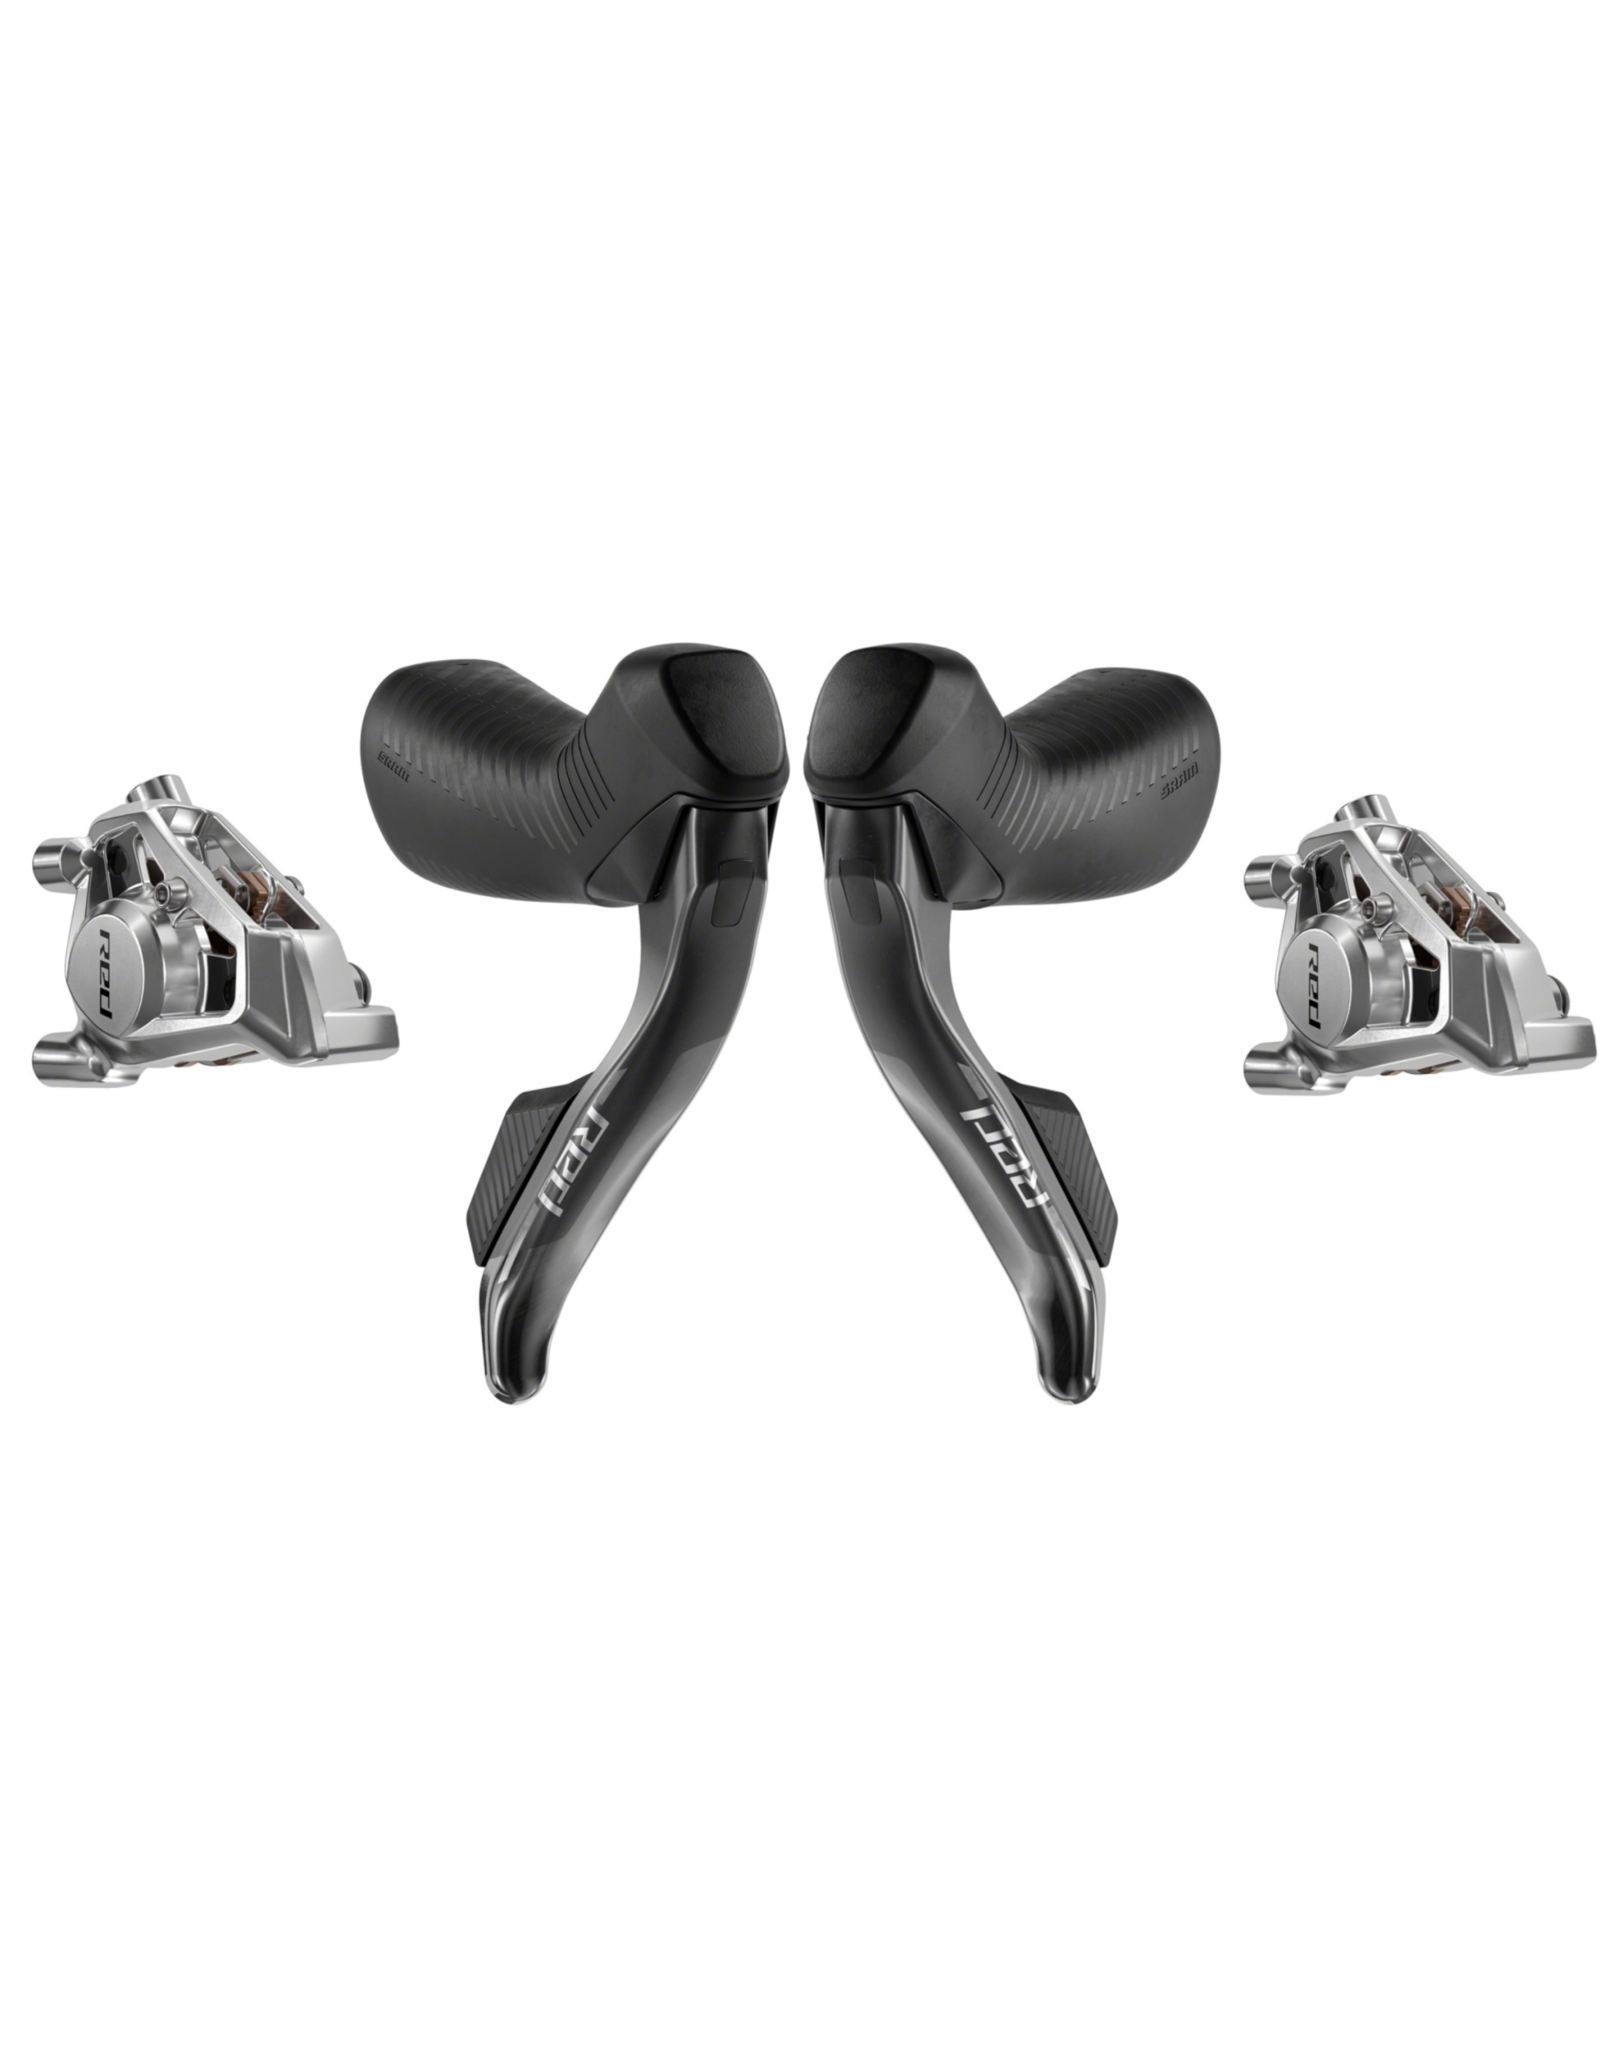 SRAM SRAM RED AXS HRD Shift/Brake Lever and Hydraulic Disc Caliper Set - Left/Front & Right/Rear, Flat Mount 20mm Offset, Black, E1